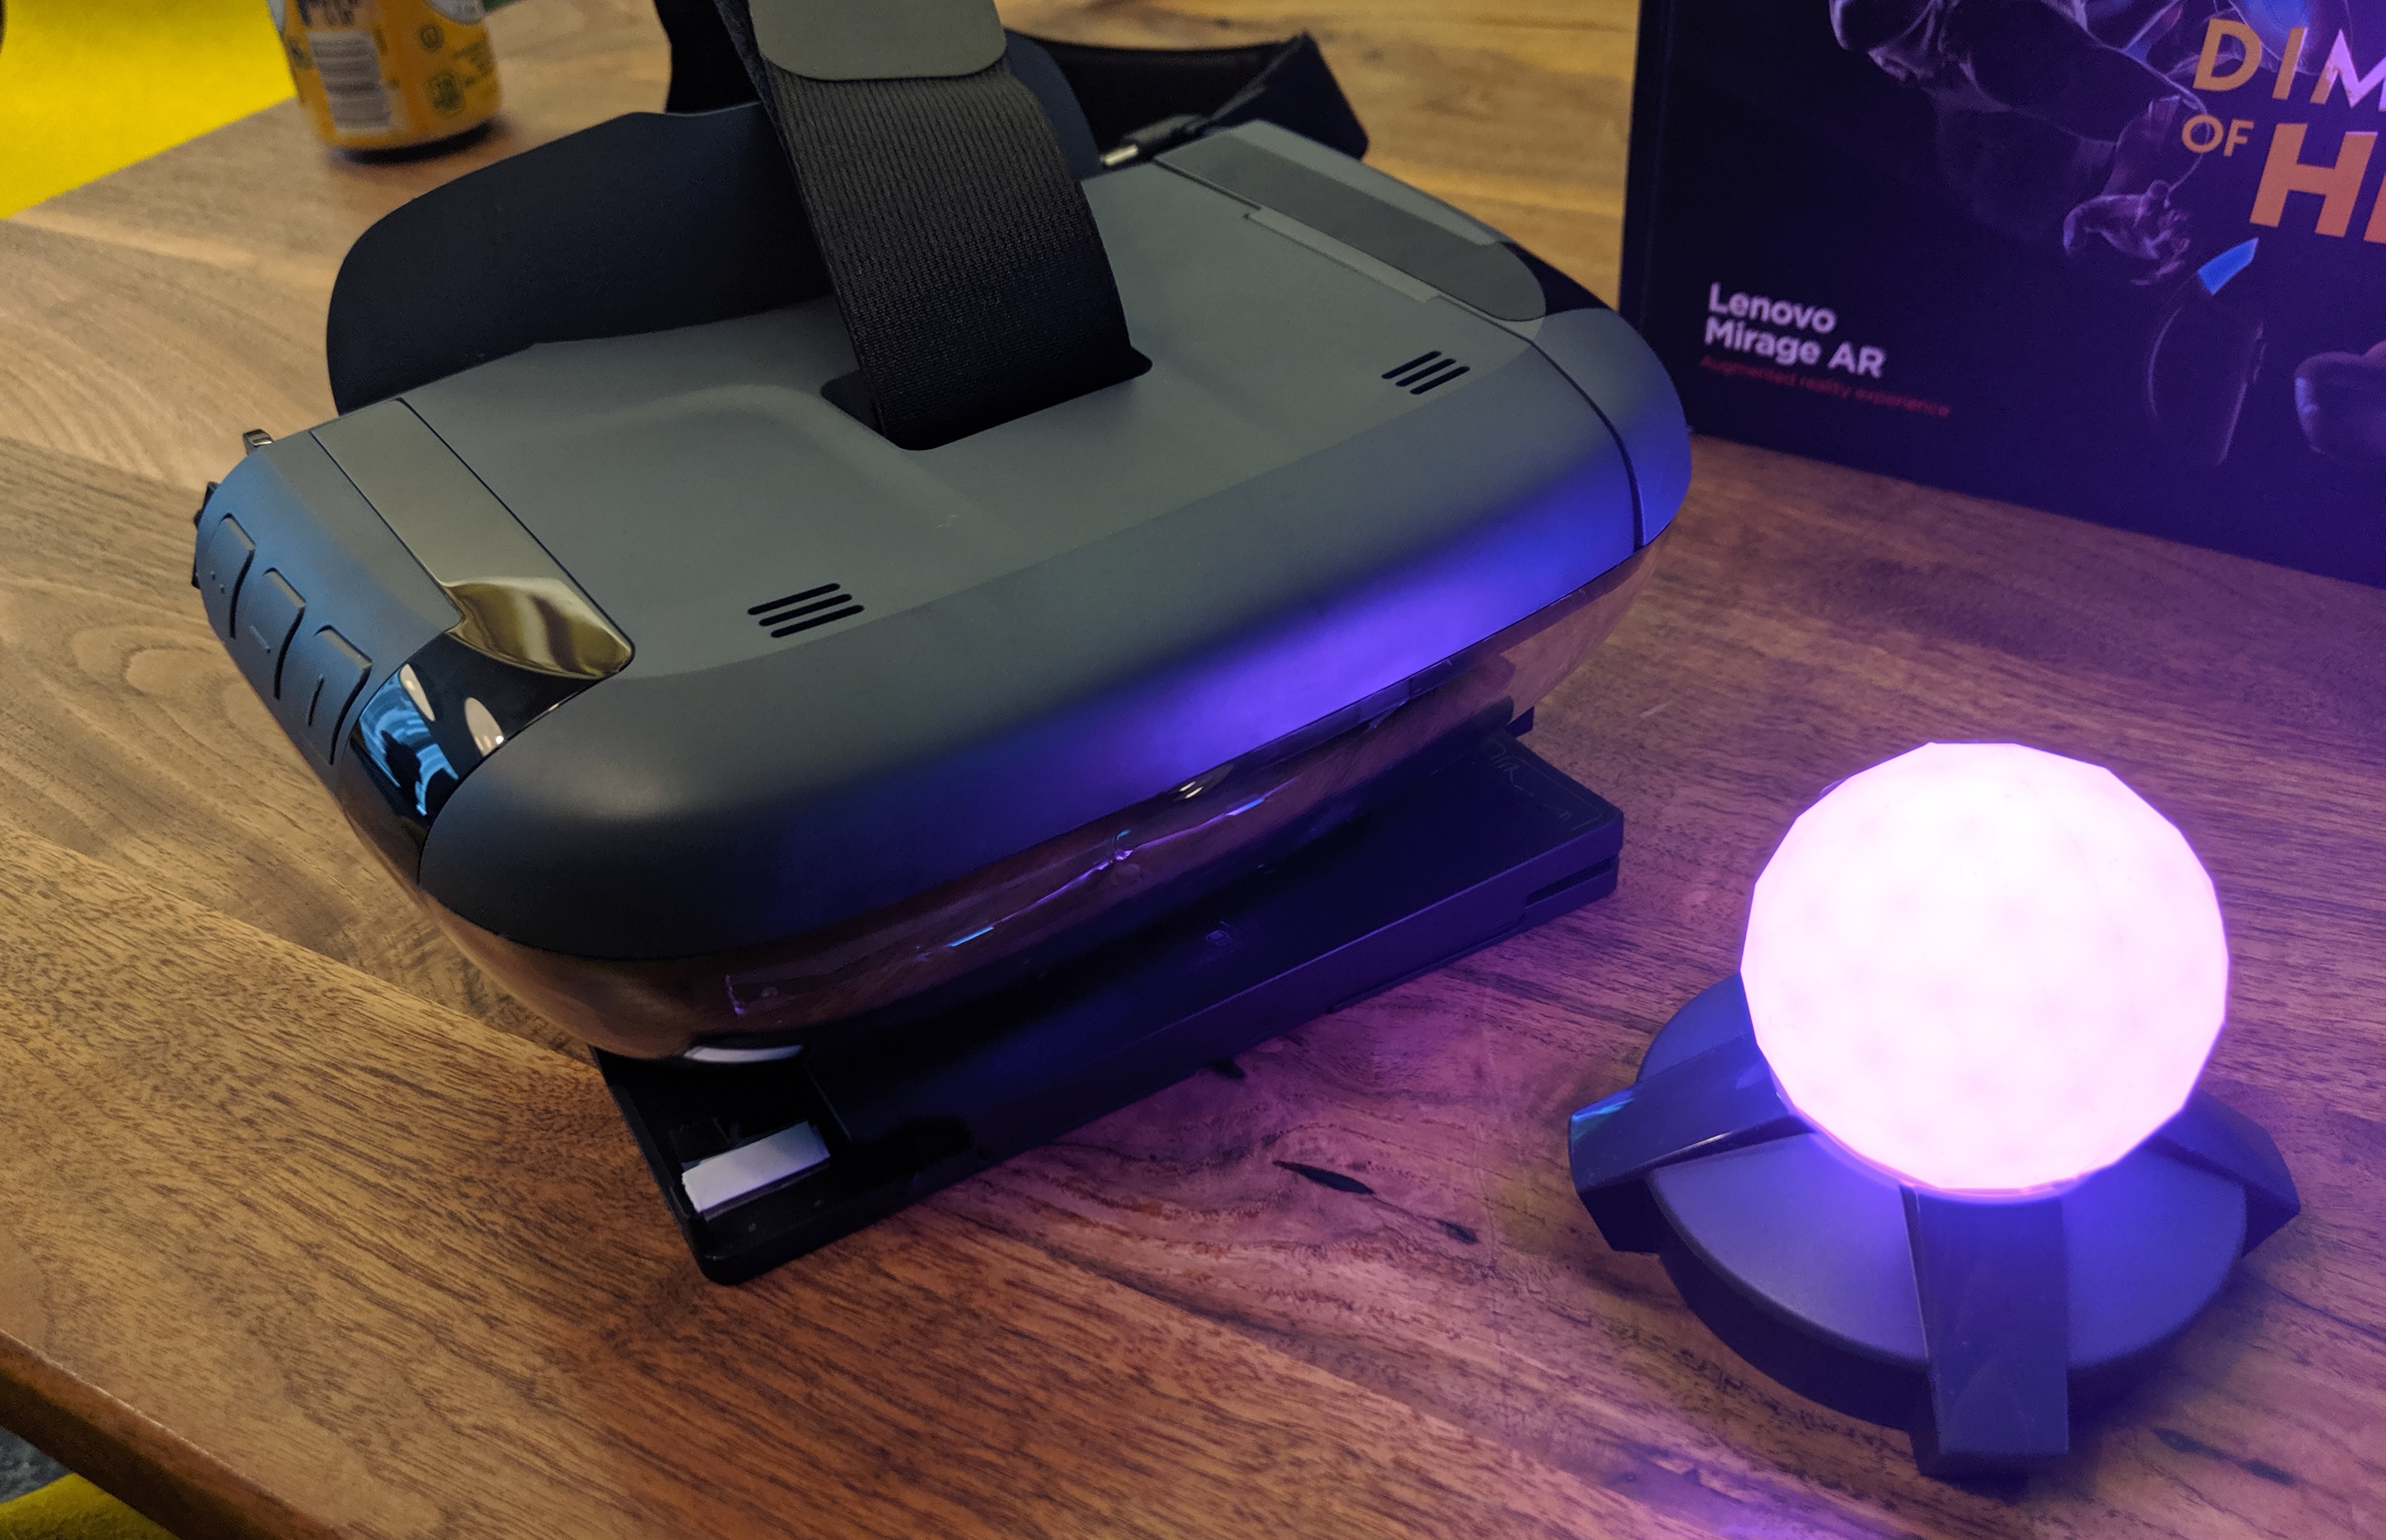 lenovo dimension of heroes star wars jedi challenges mirage ar headset and tracking beacon